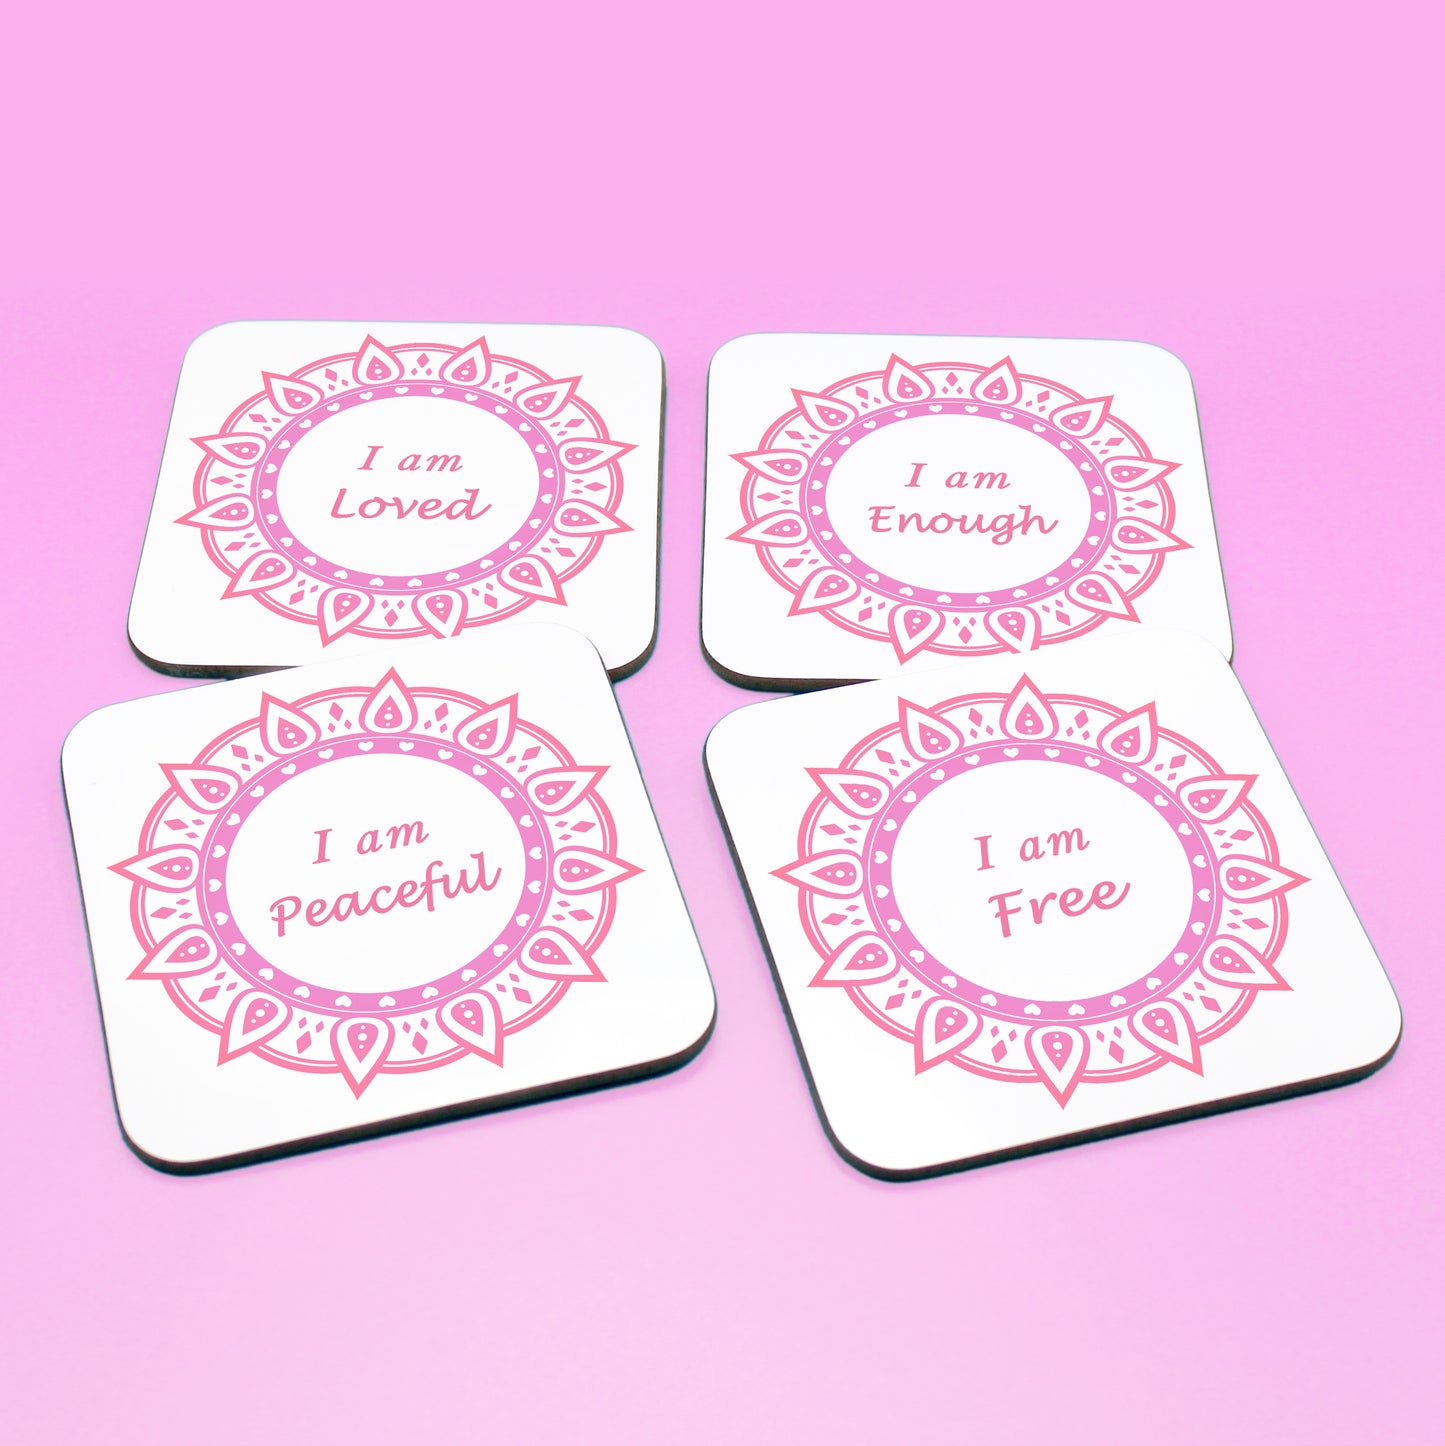 Wellbeing gift. Four square wooden backed personal affirmations coaster set. Theme is Letting Go in this set of four. Mandala design with daily affirmation wording inside the mandala.  Affirmations read I am Loved, I am Enough, I am Peaceful, I am Free (all coaster mandalas are a red and pink mandala),